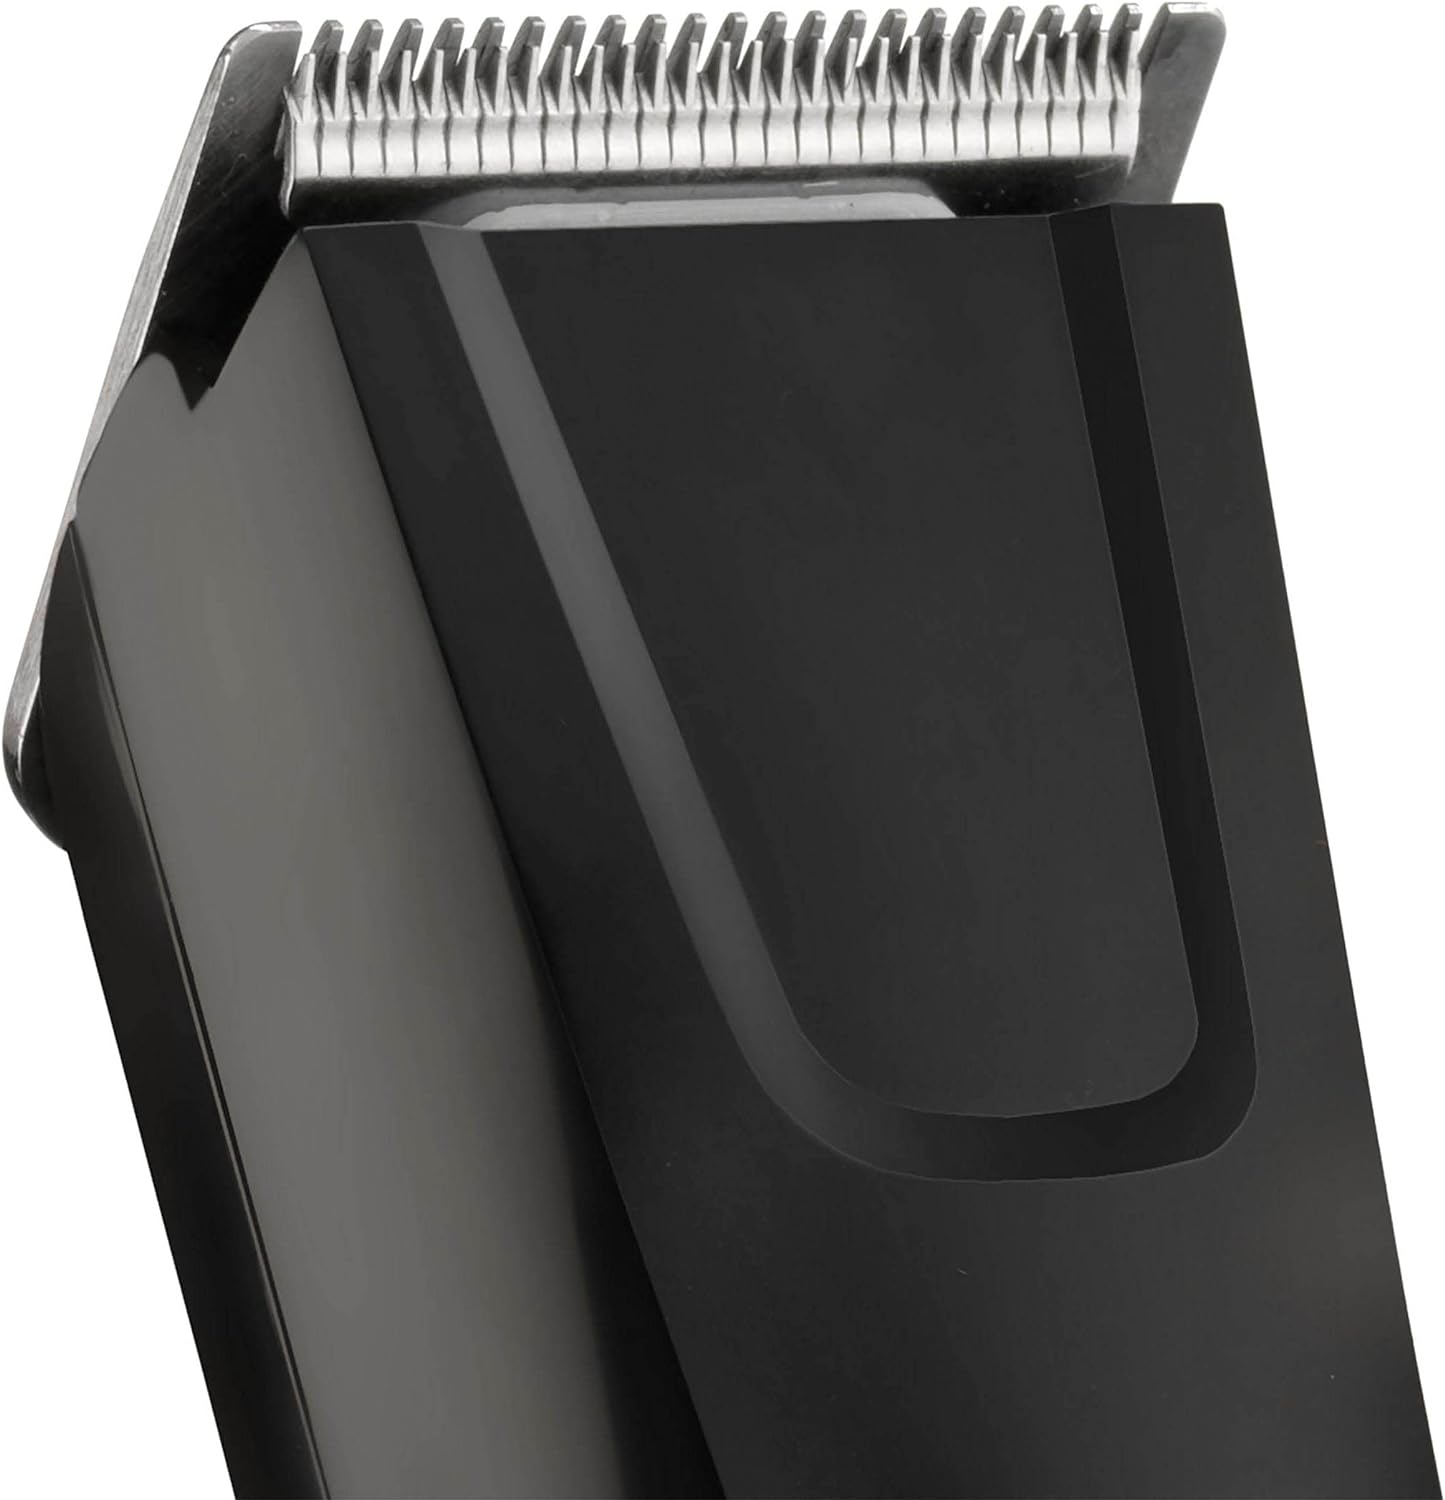 Babyliss E756E Trimmer 45MM XL Blades Multi Cutting Lenghts